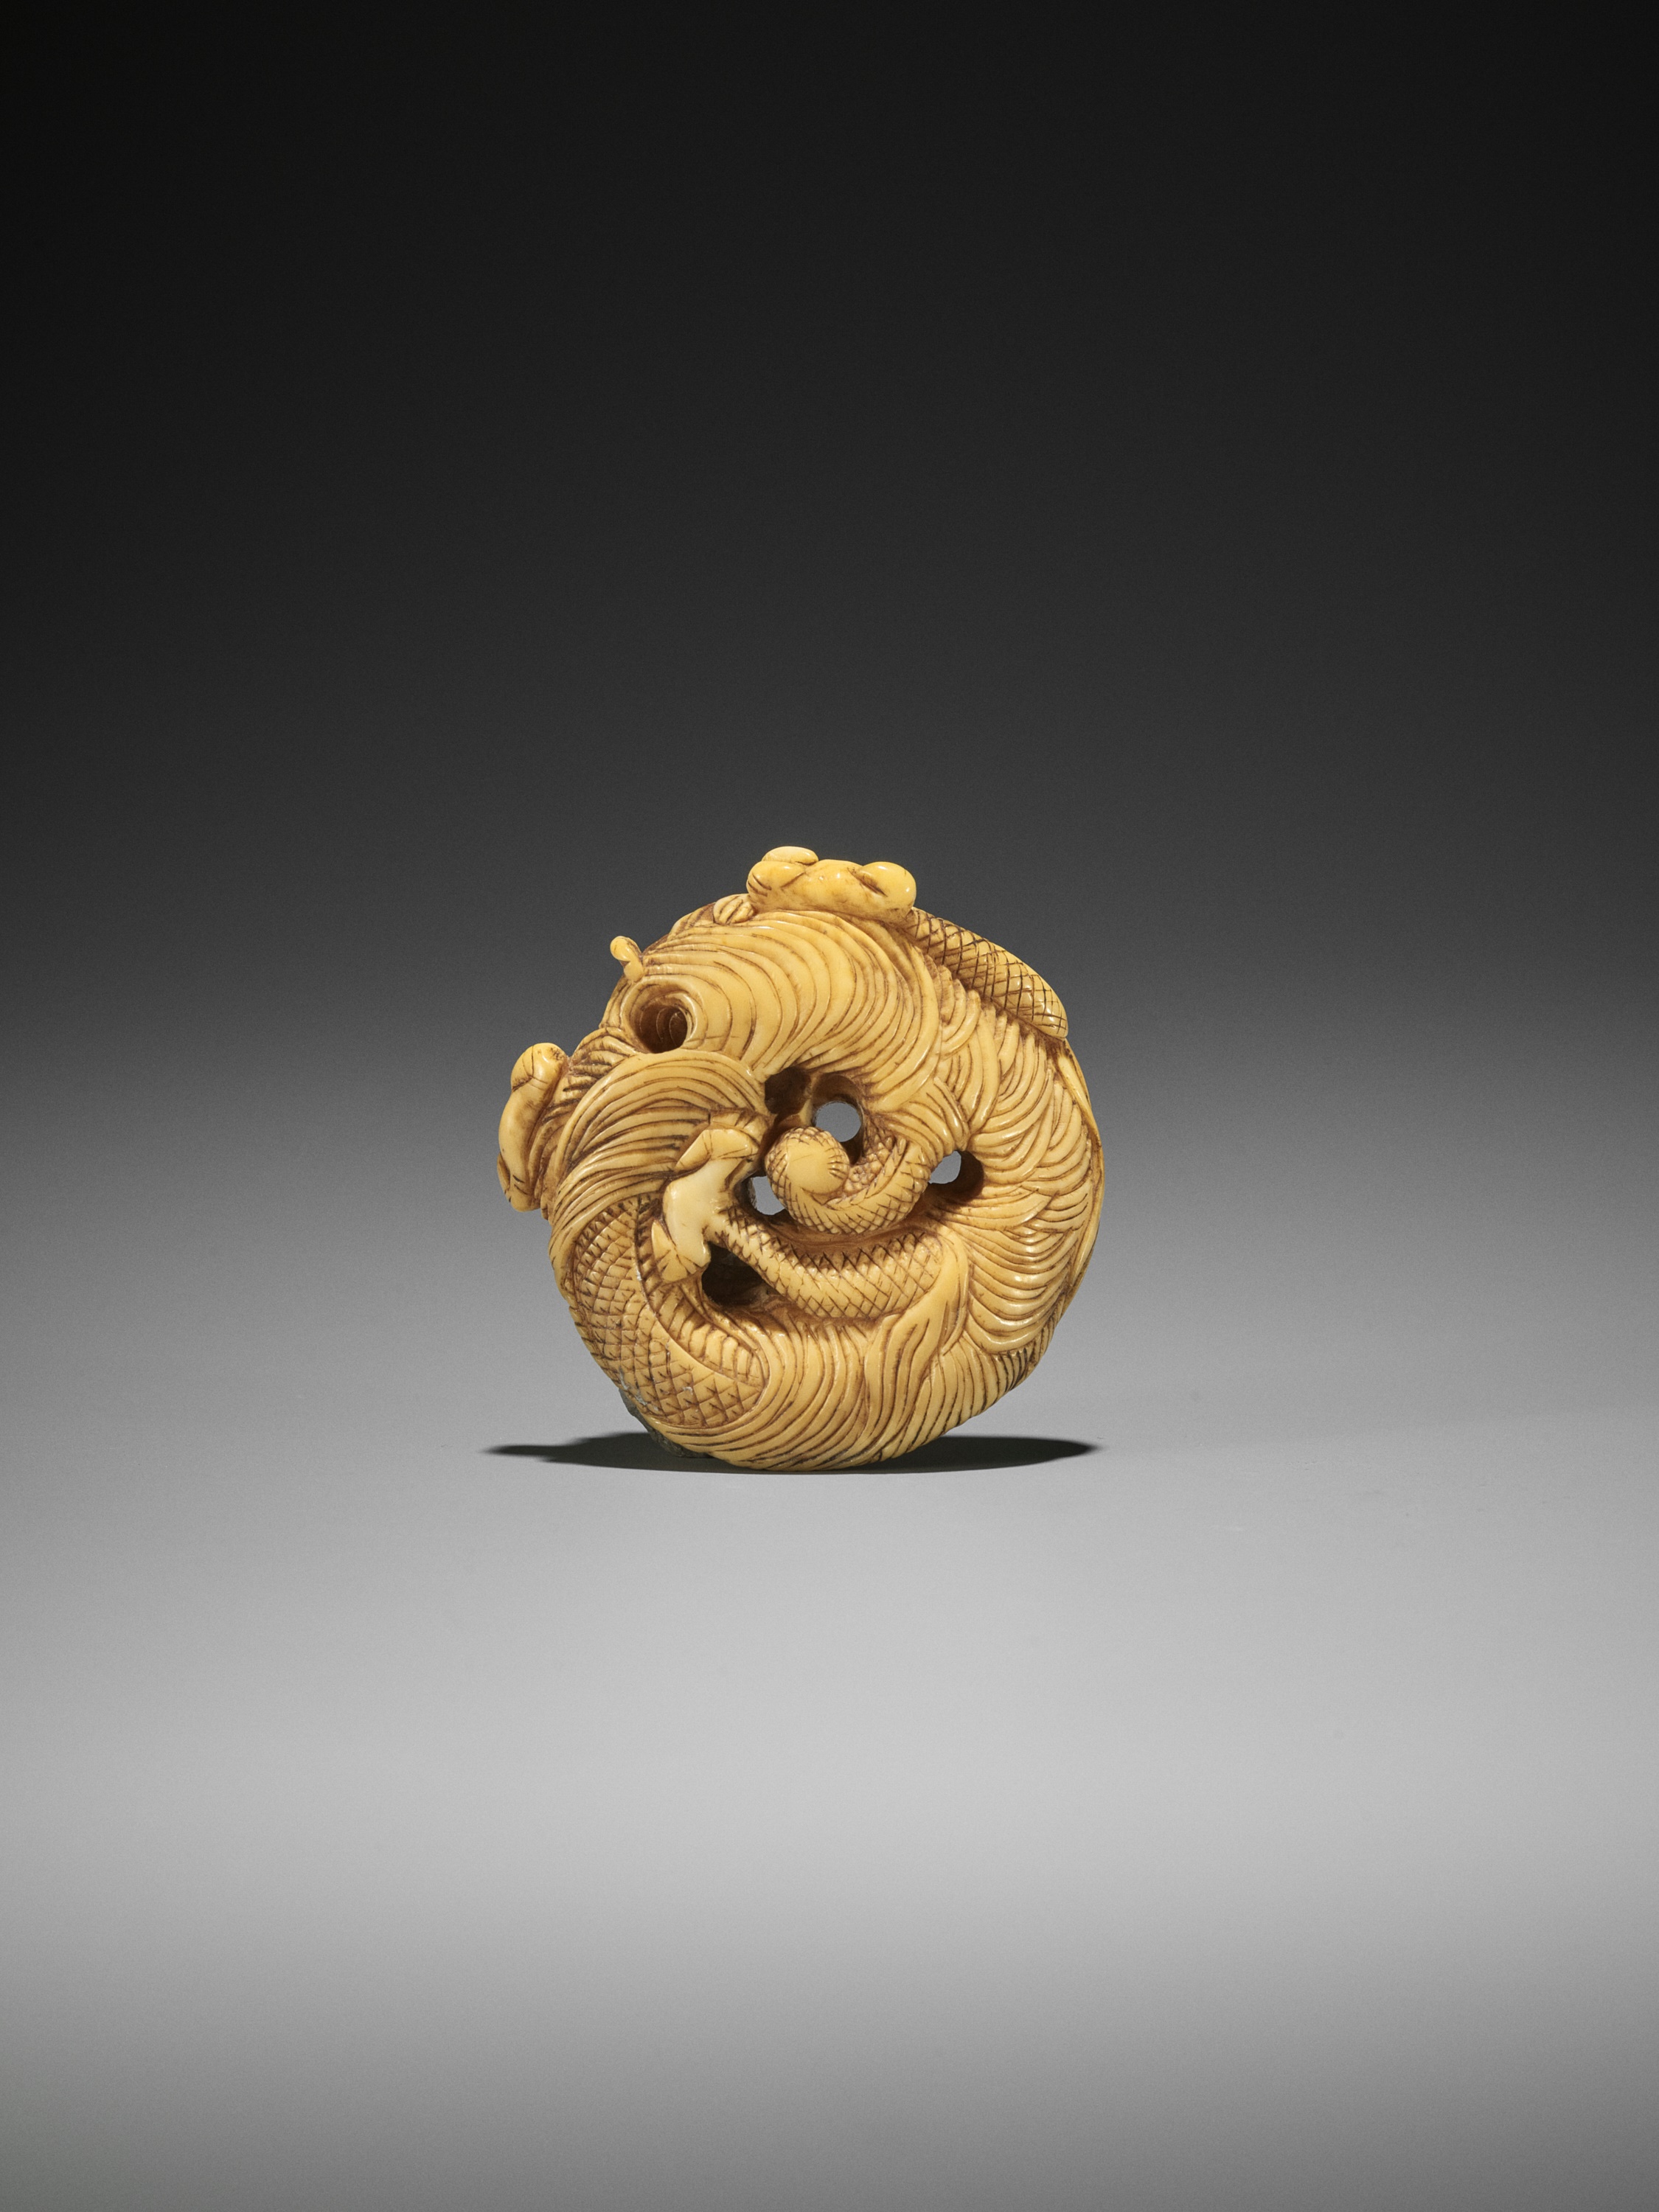 AN IVORY NETSUKE OF A COILED ONE-HORNED DRAGON - Image 2 of 10